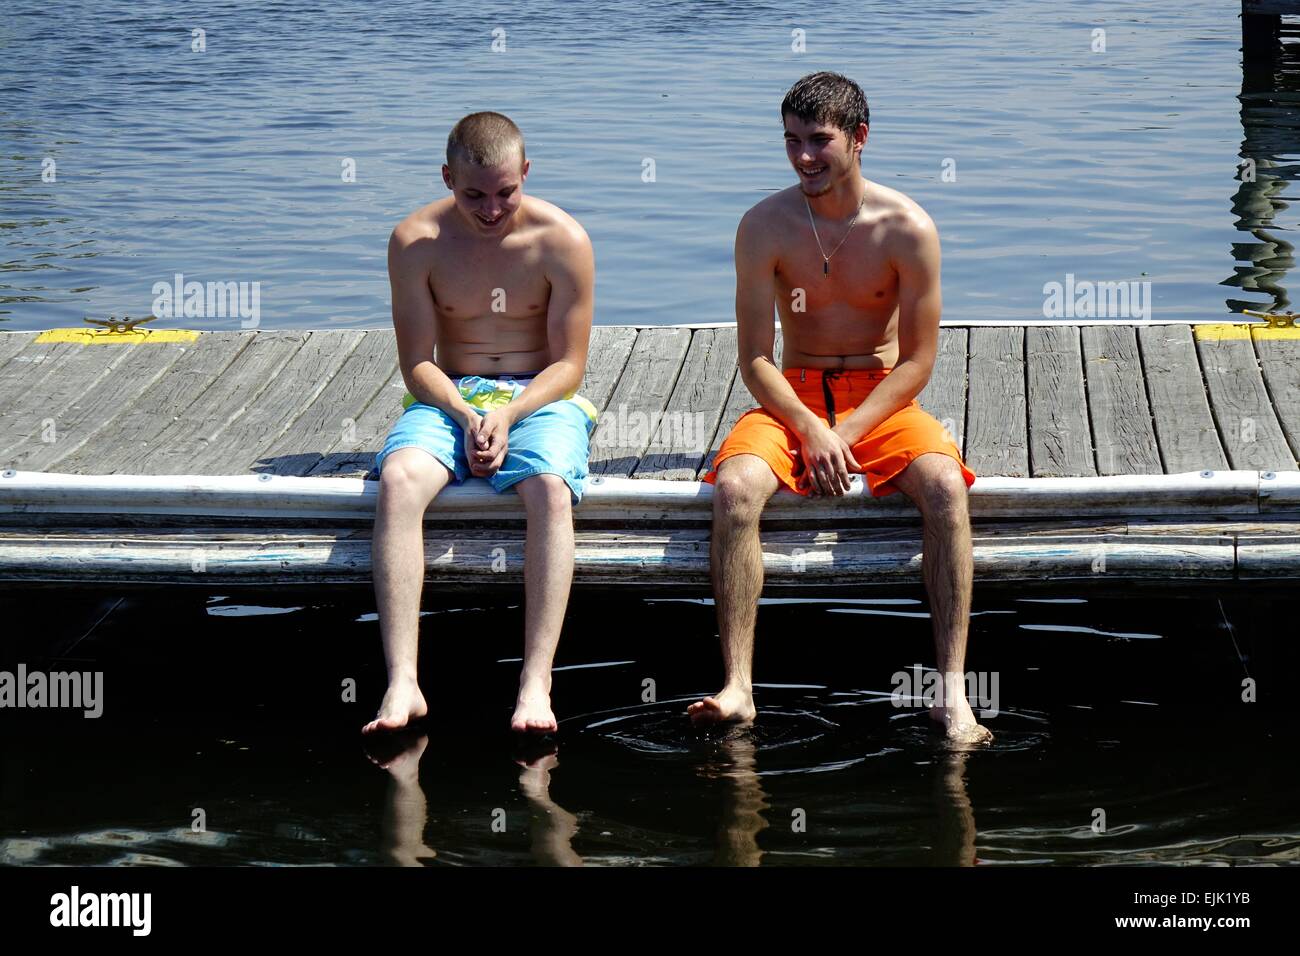 Boys in bathing suits sitting on a dock in Homosassa, Florida Stock Photo